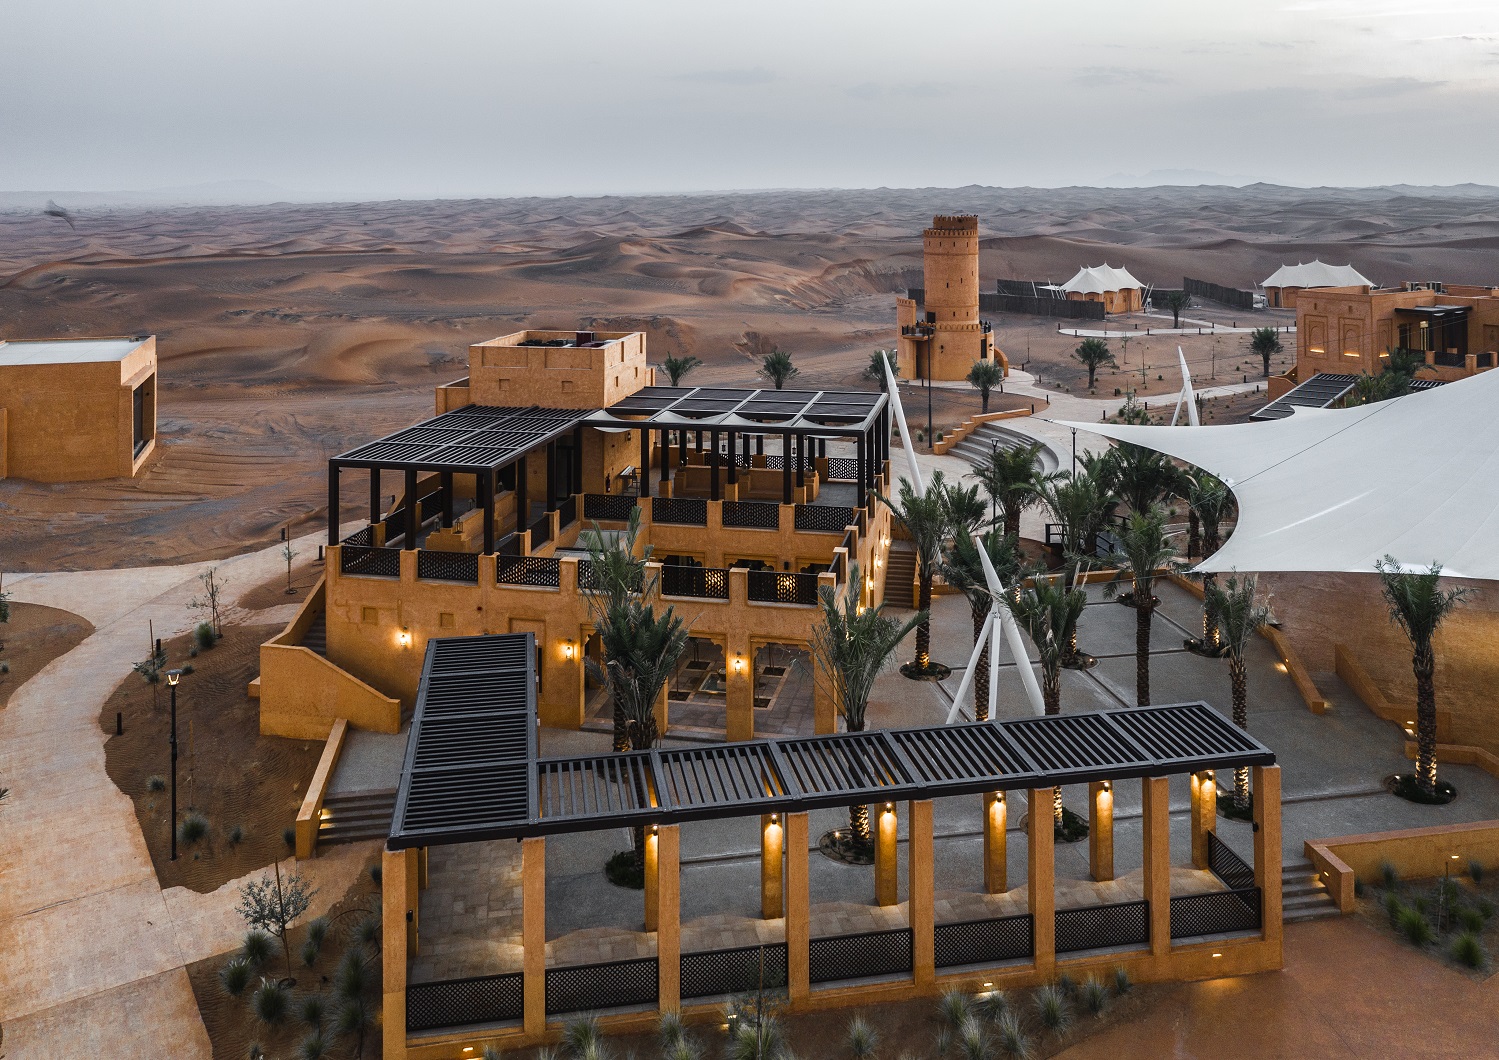 All Shurooq retreats under ‘Sharjah Collection’ win coveted World Luxury Hotel Awards